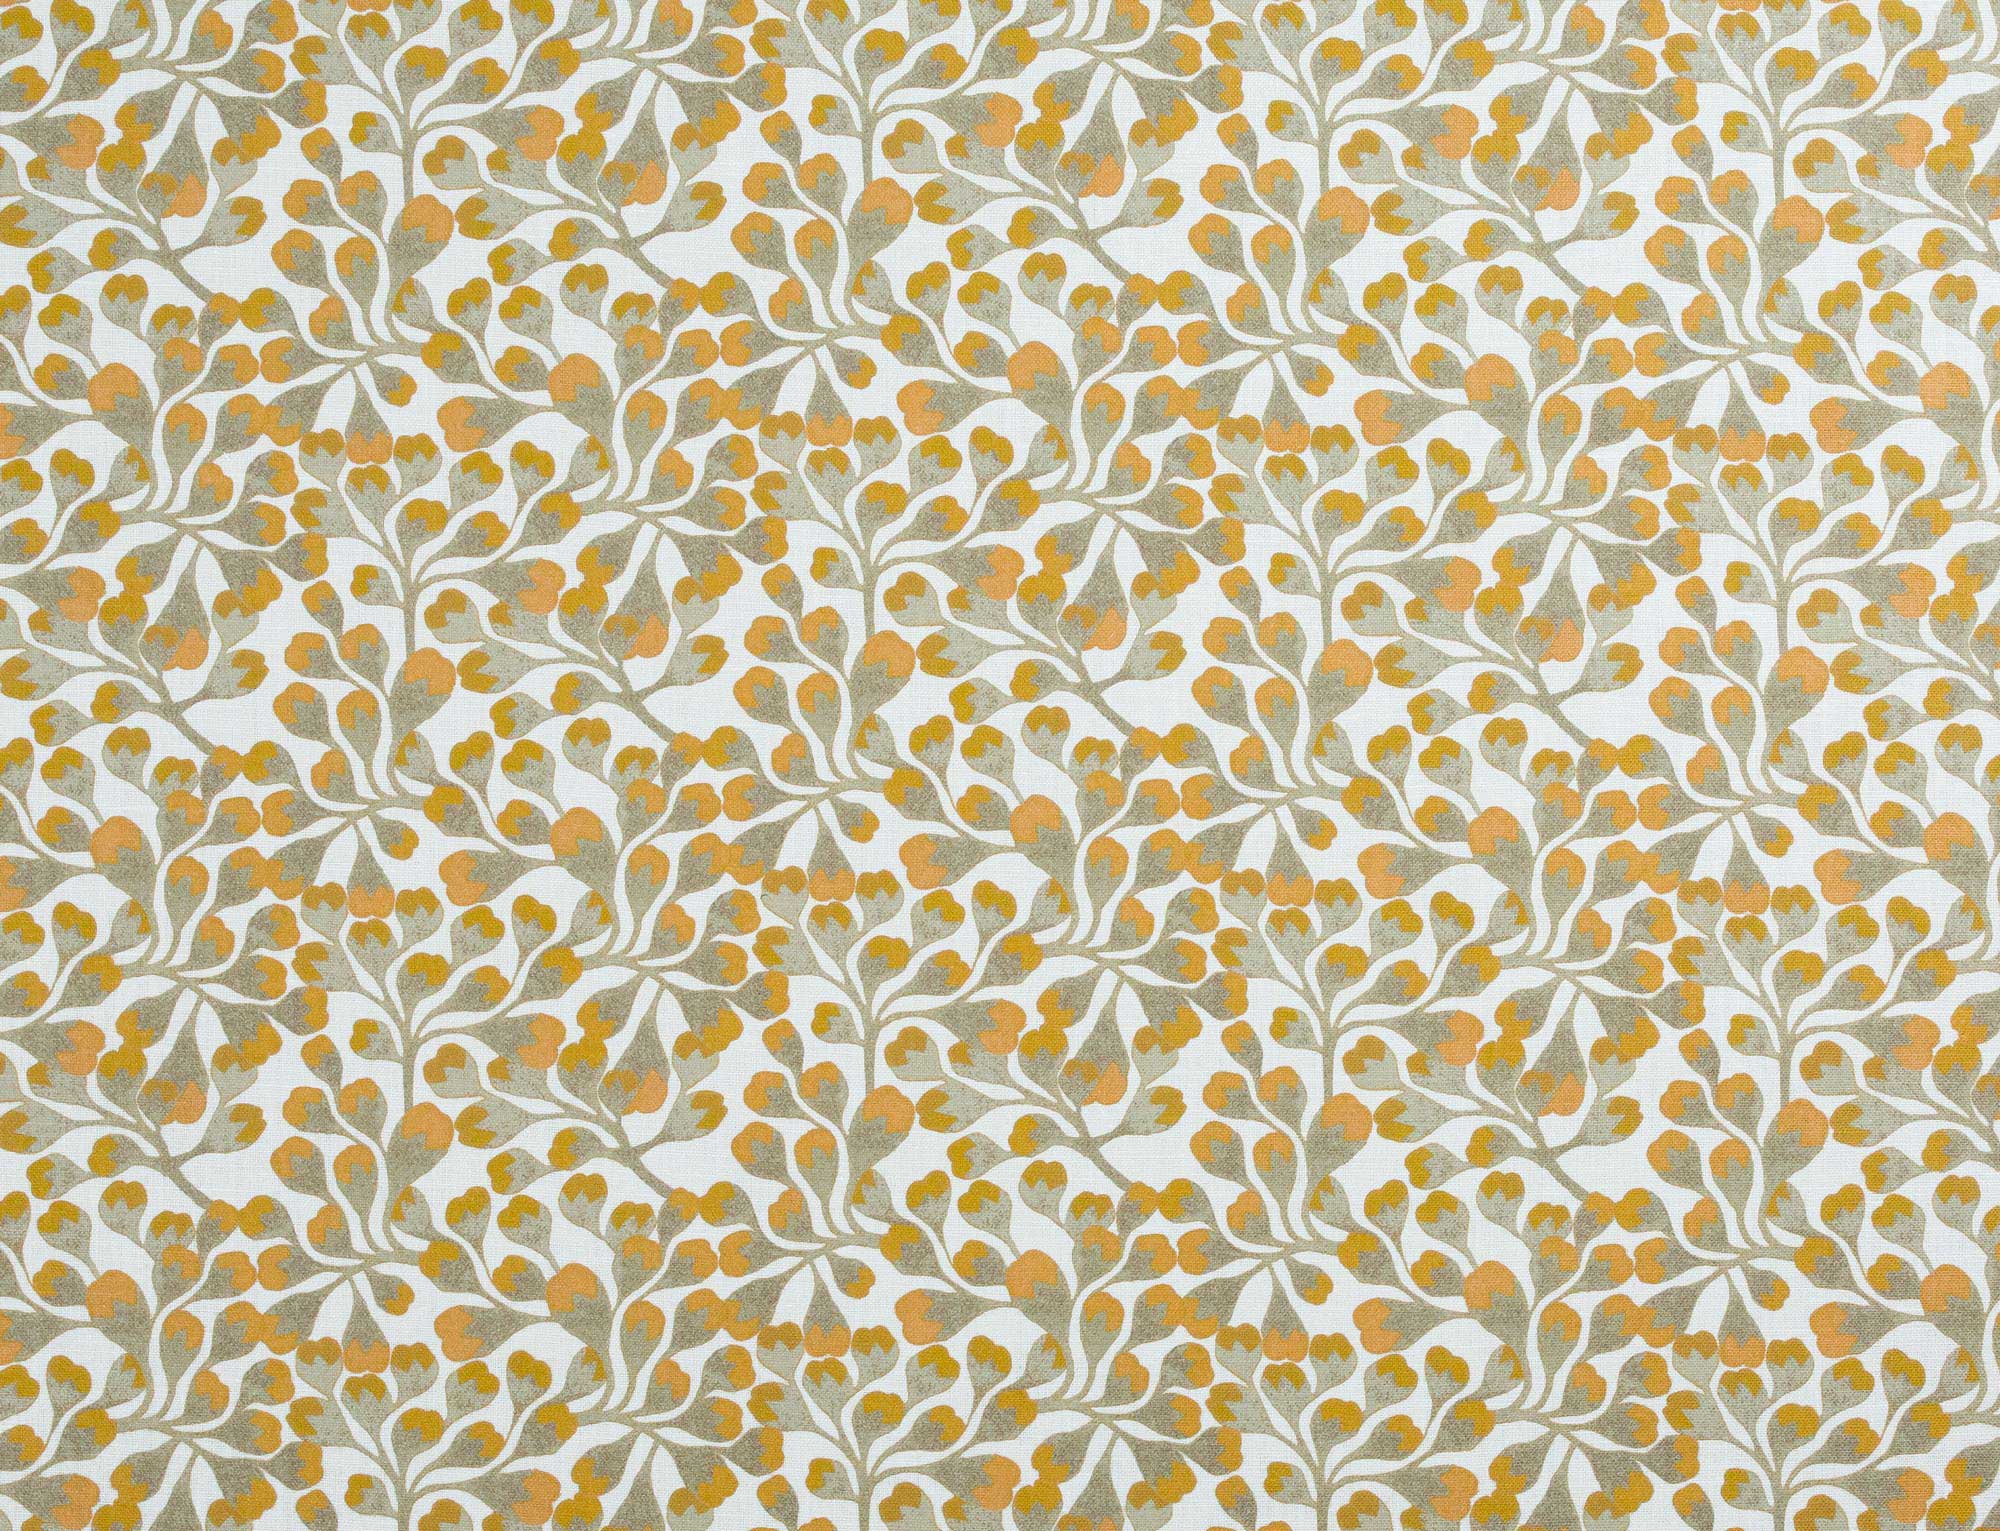 Detail of fabric in an abstract botanical print in gold and gray on a white field.